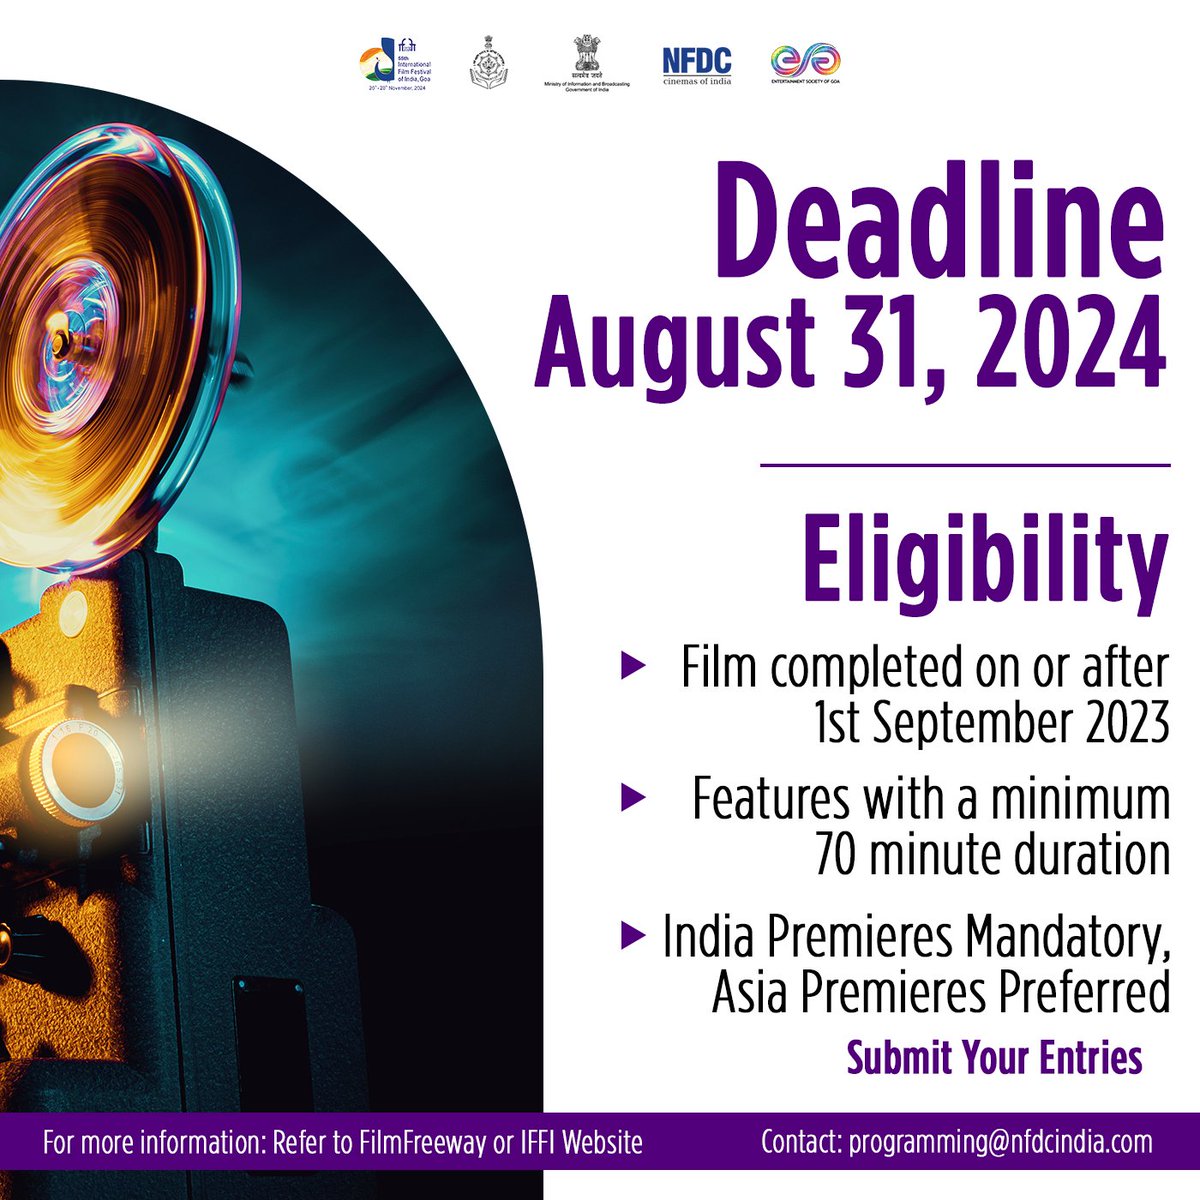 Call for Entries! The 55th International Film Festival of India is now accepting submissions until August 31, 2024. International Films only! Submit your entries via FilmFreeway or the IFFI website. For more information, contact programming@nfdcindia.com. #IFFI #FilmFestival